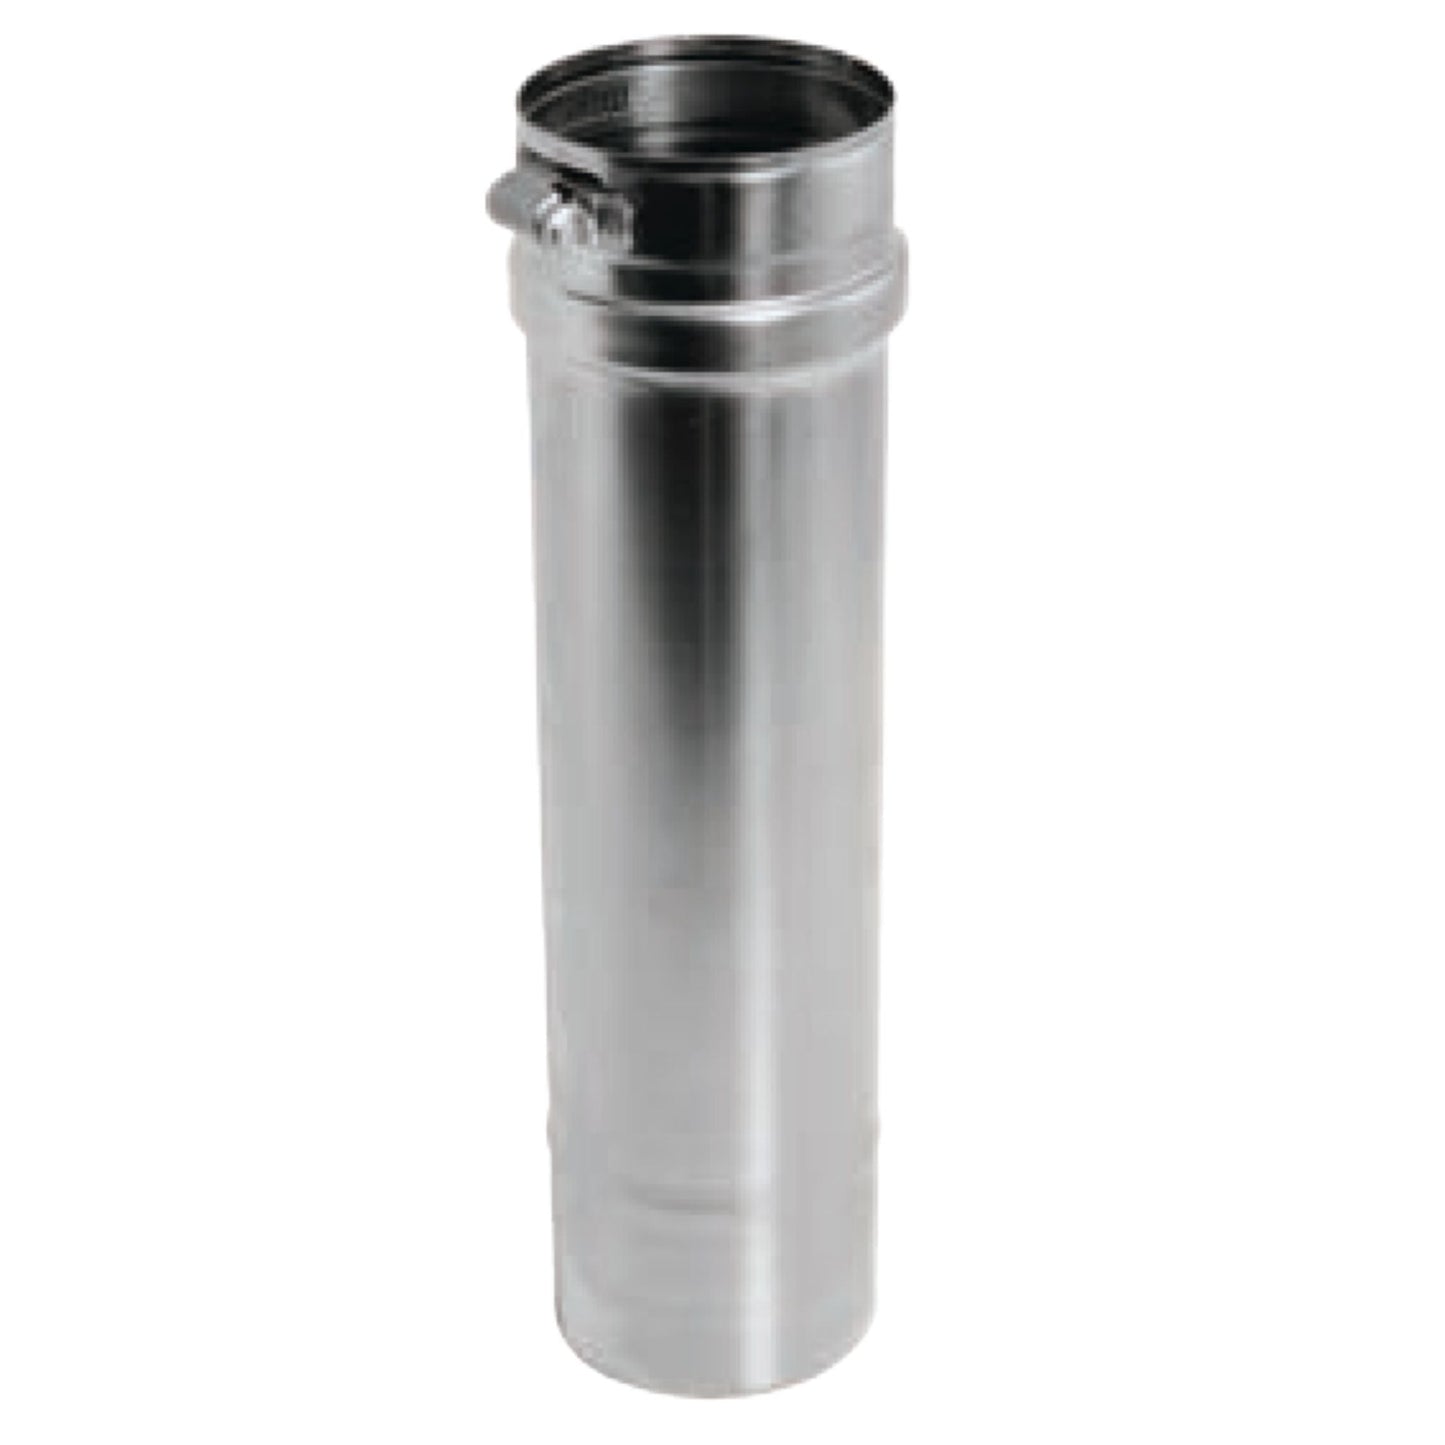 DuraVent FasNSeal 16" x 6" 316L Stainless Steel Vent Length